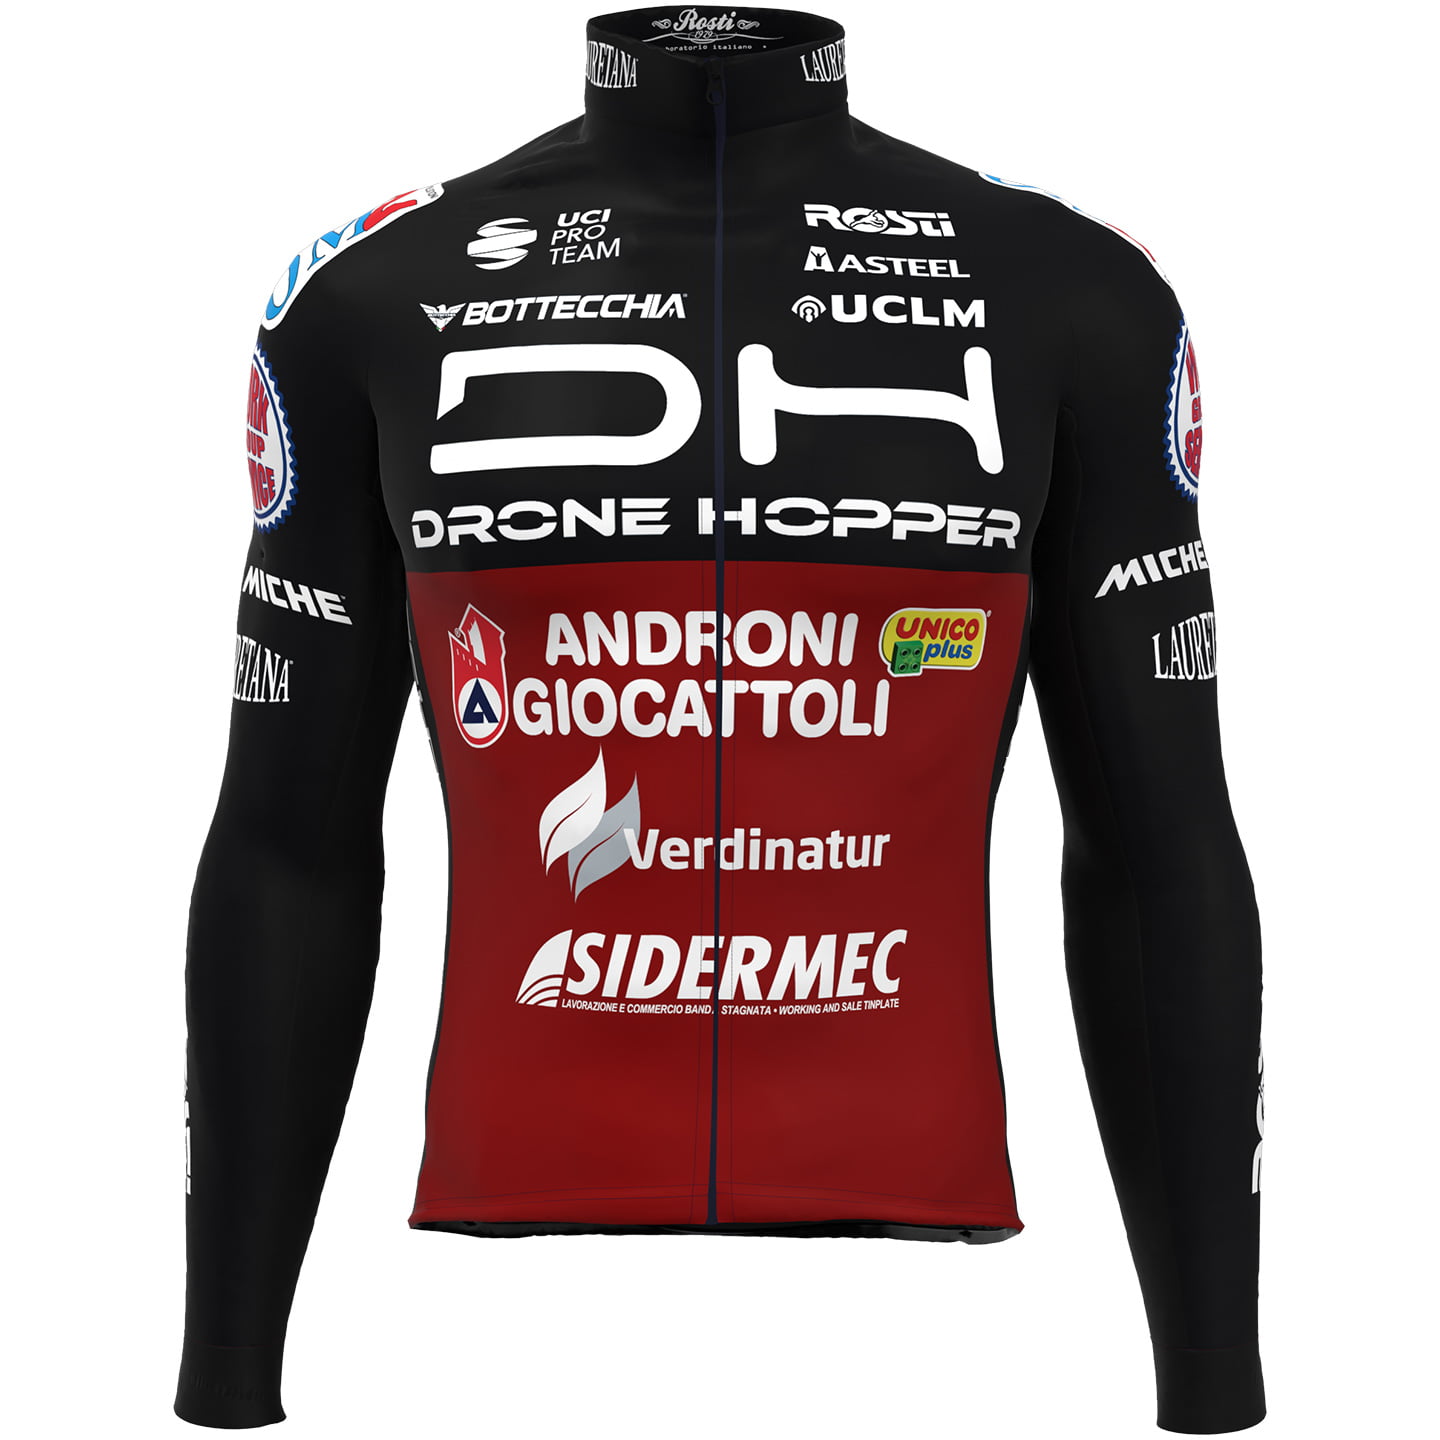 DRONE HOPPER - ANDRONI GIOCATTOLI 2022 Long Sleeve Jersey, for men, size 2XL, Cycle shirt, Bike gear